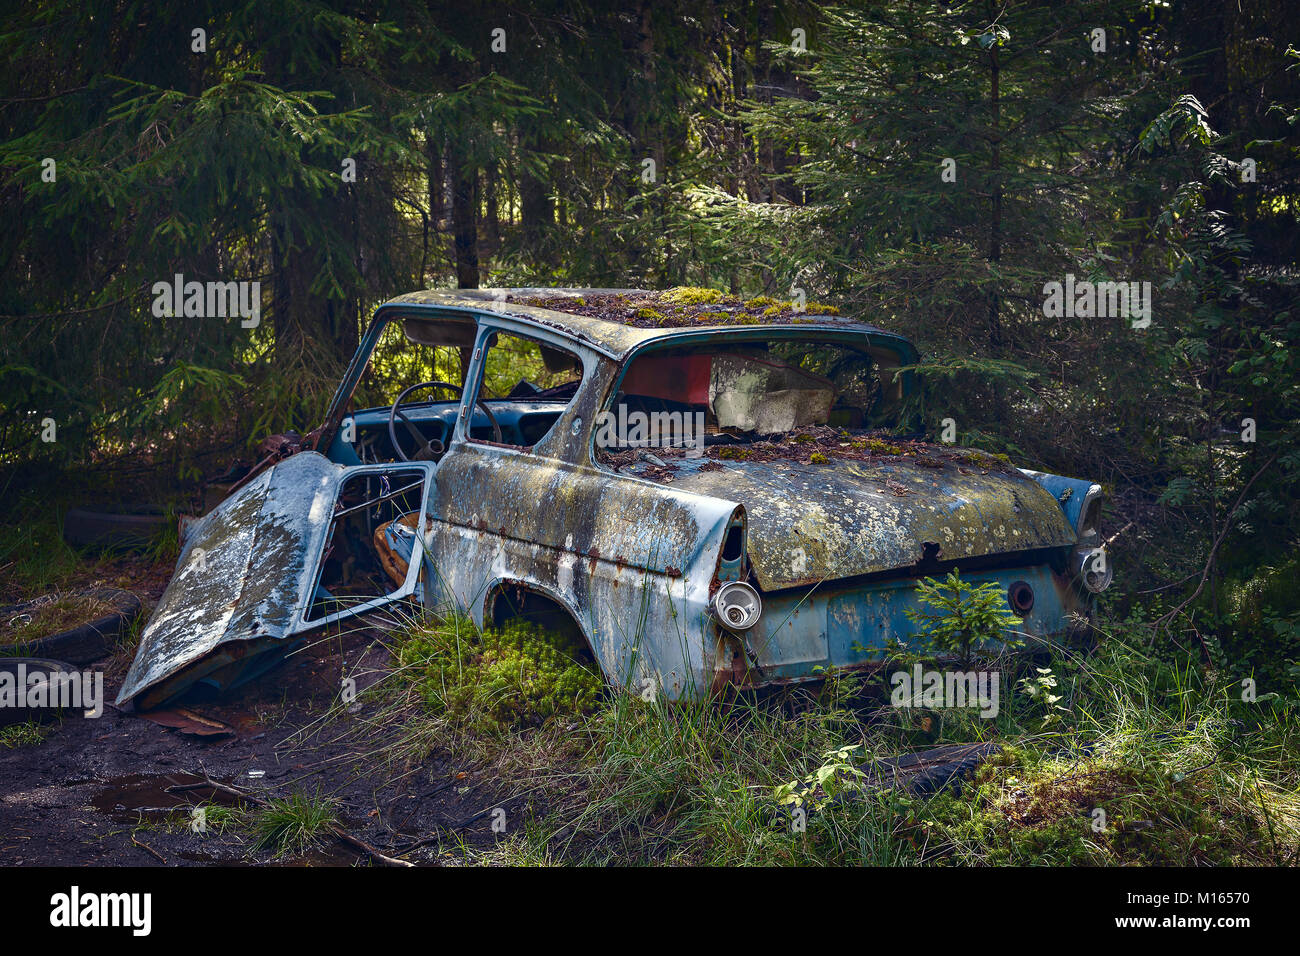 Wrecked abandoned car in the forest. Stock Photo